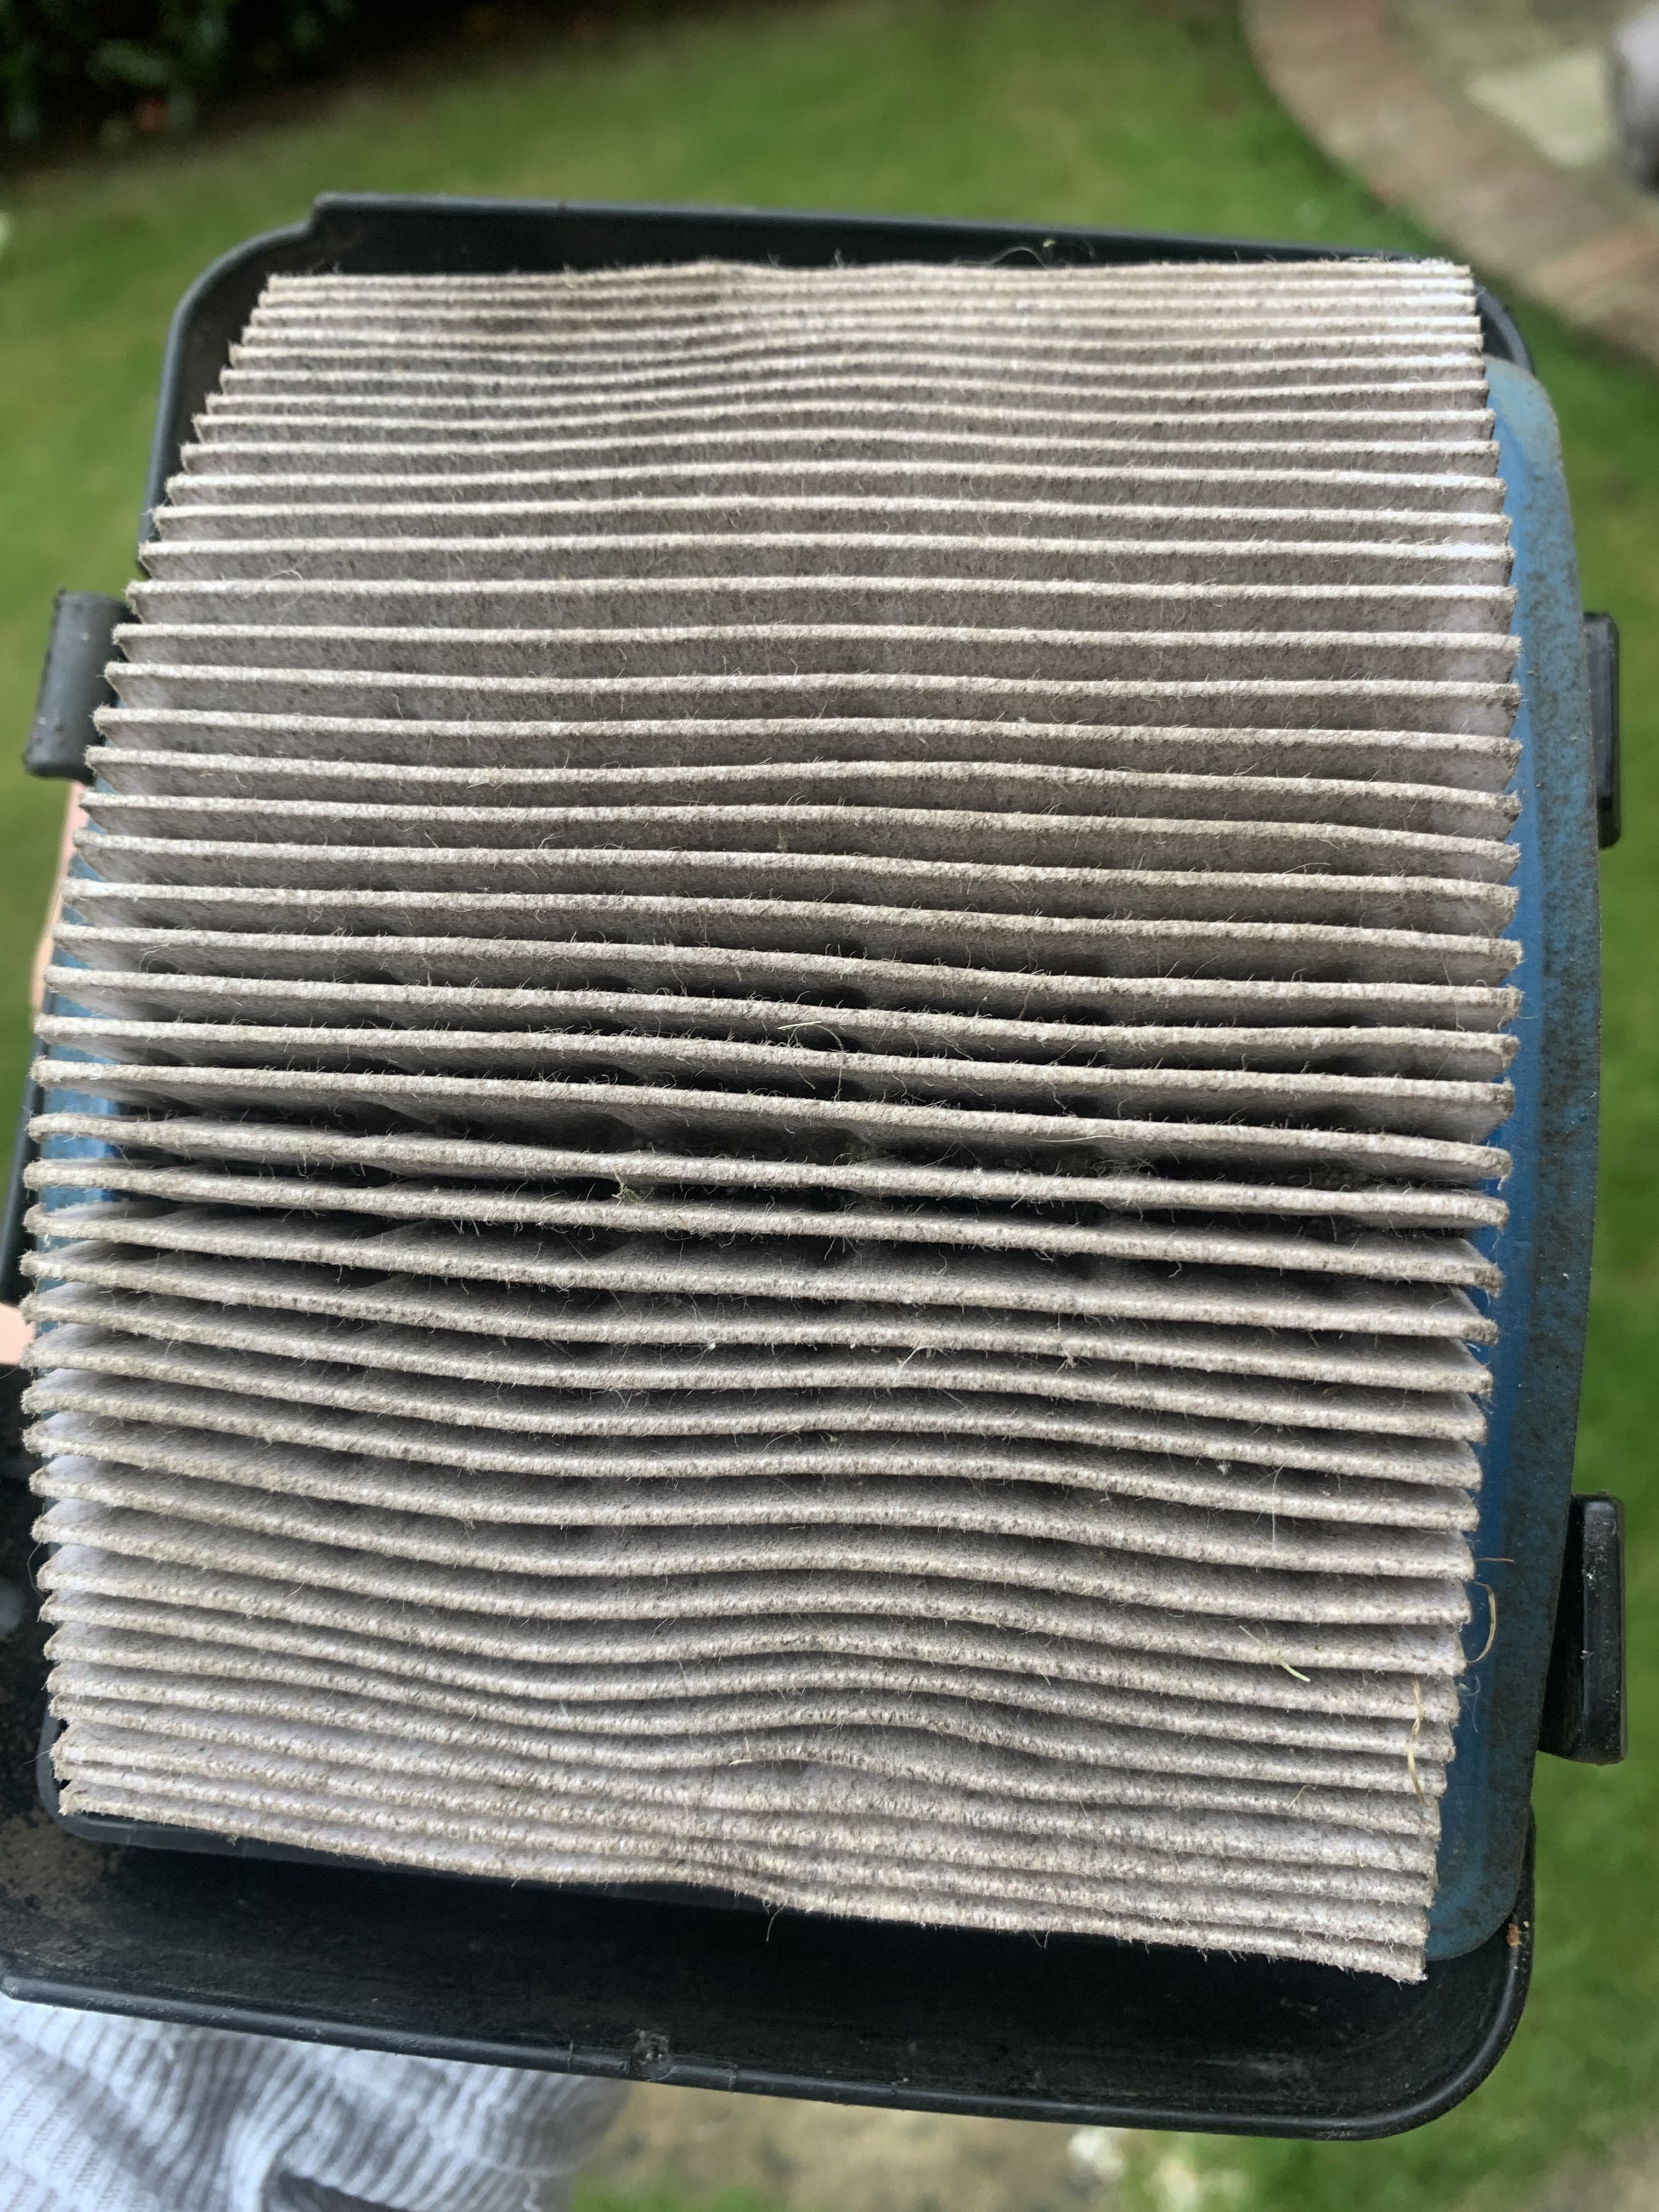 How Often Should You Replace Your Lawn Mower Air Filter?